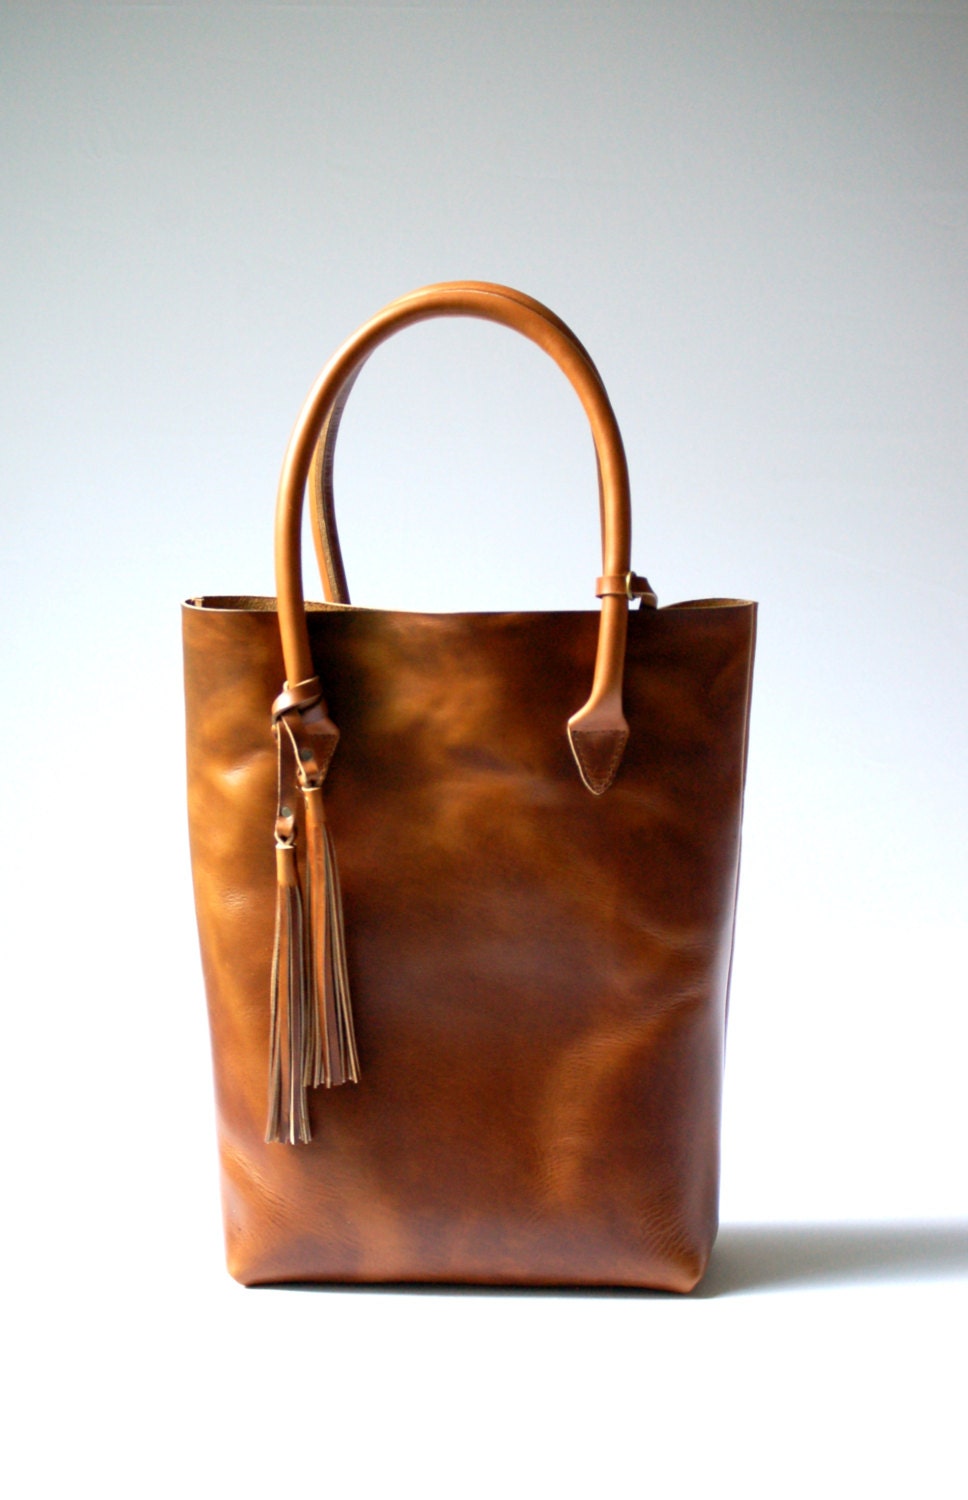 The Panama Tote in Deep Tan Horween leather